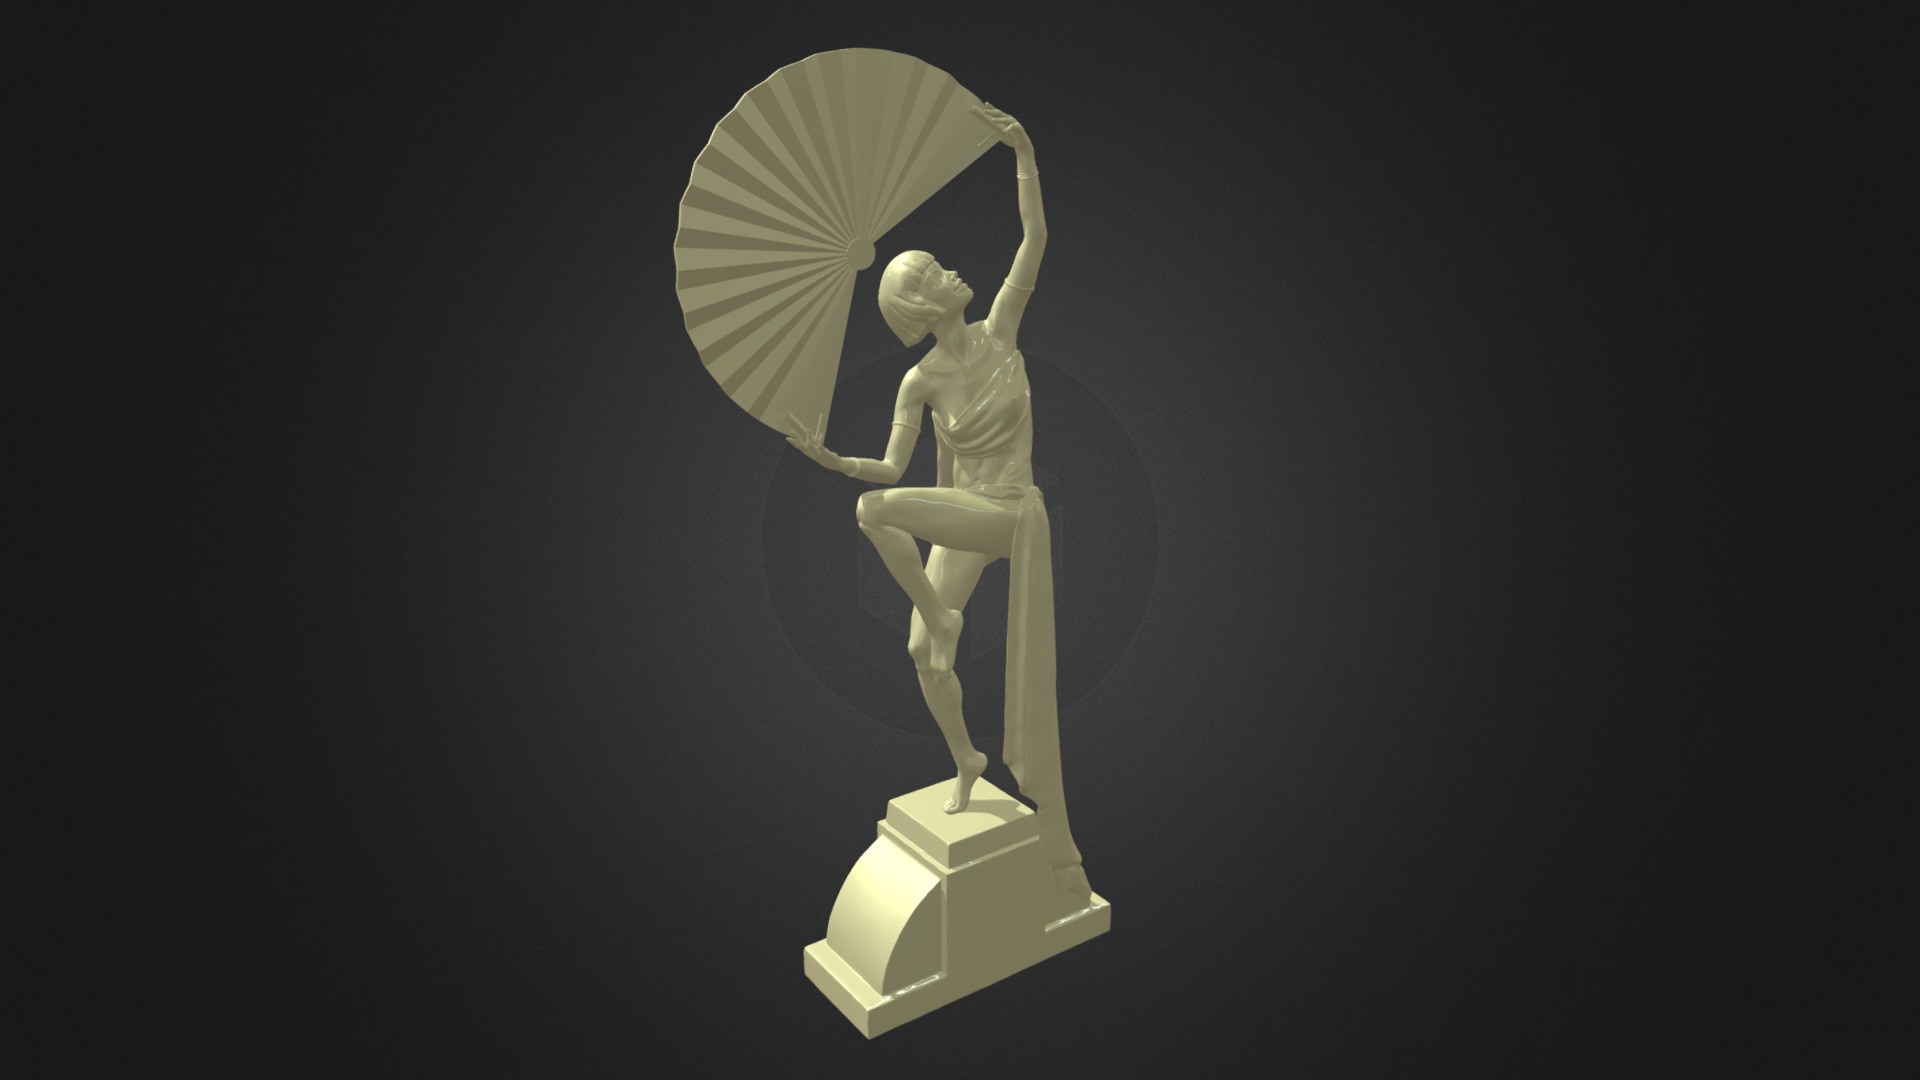 3D model Art Deco Sculpture1 3D Printable - This is a 3D model of the Art Deco Sculpture1 3D Printable. The 3D model is about a statue of a person holding an umbrella.